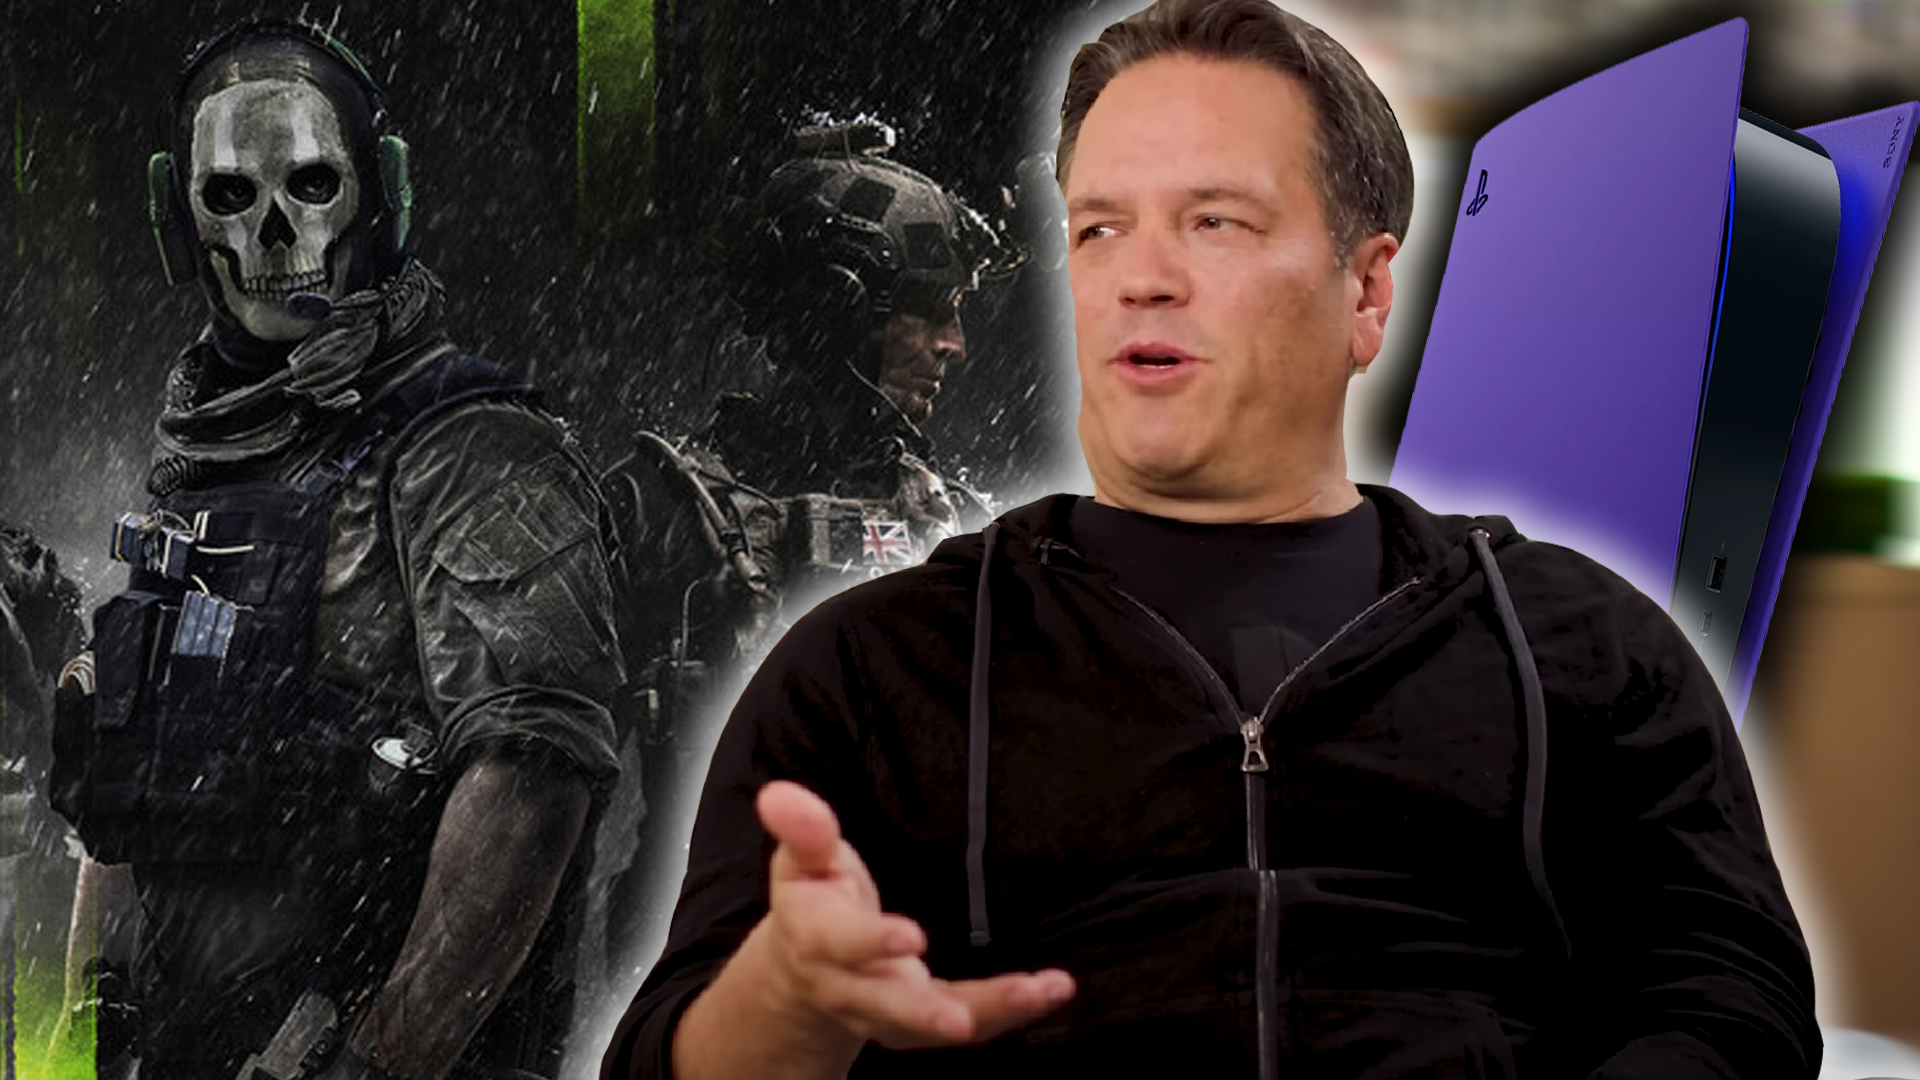 Phil Spencer says Call of Duty will stay native on PlayStation - The Verge